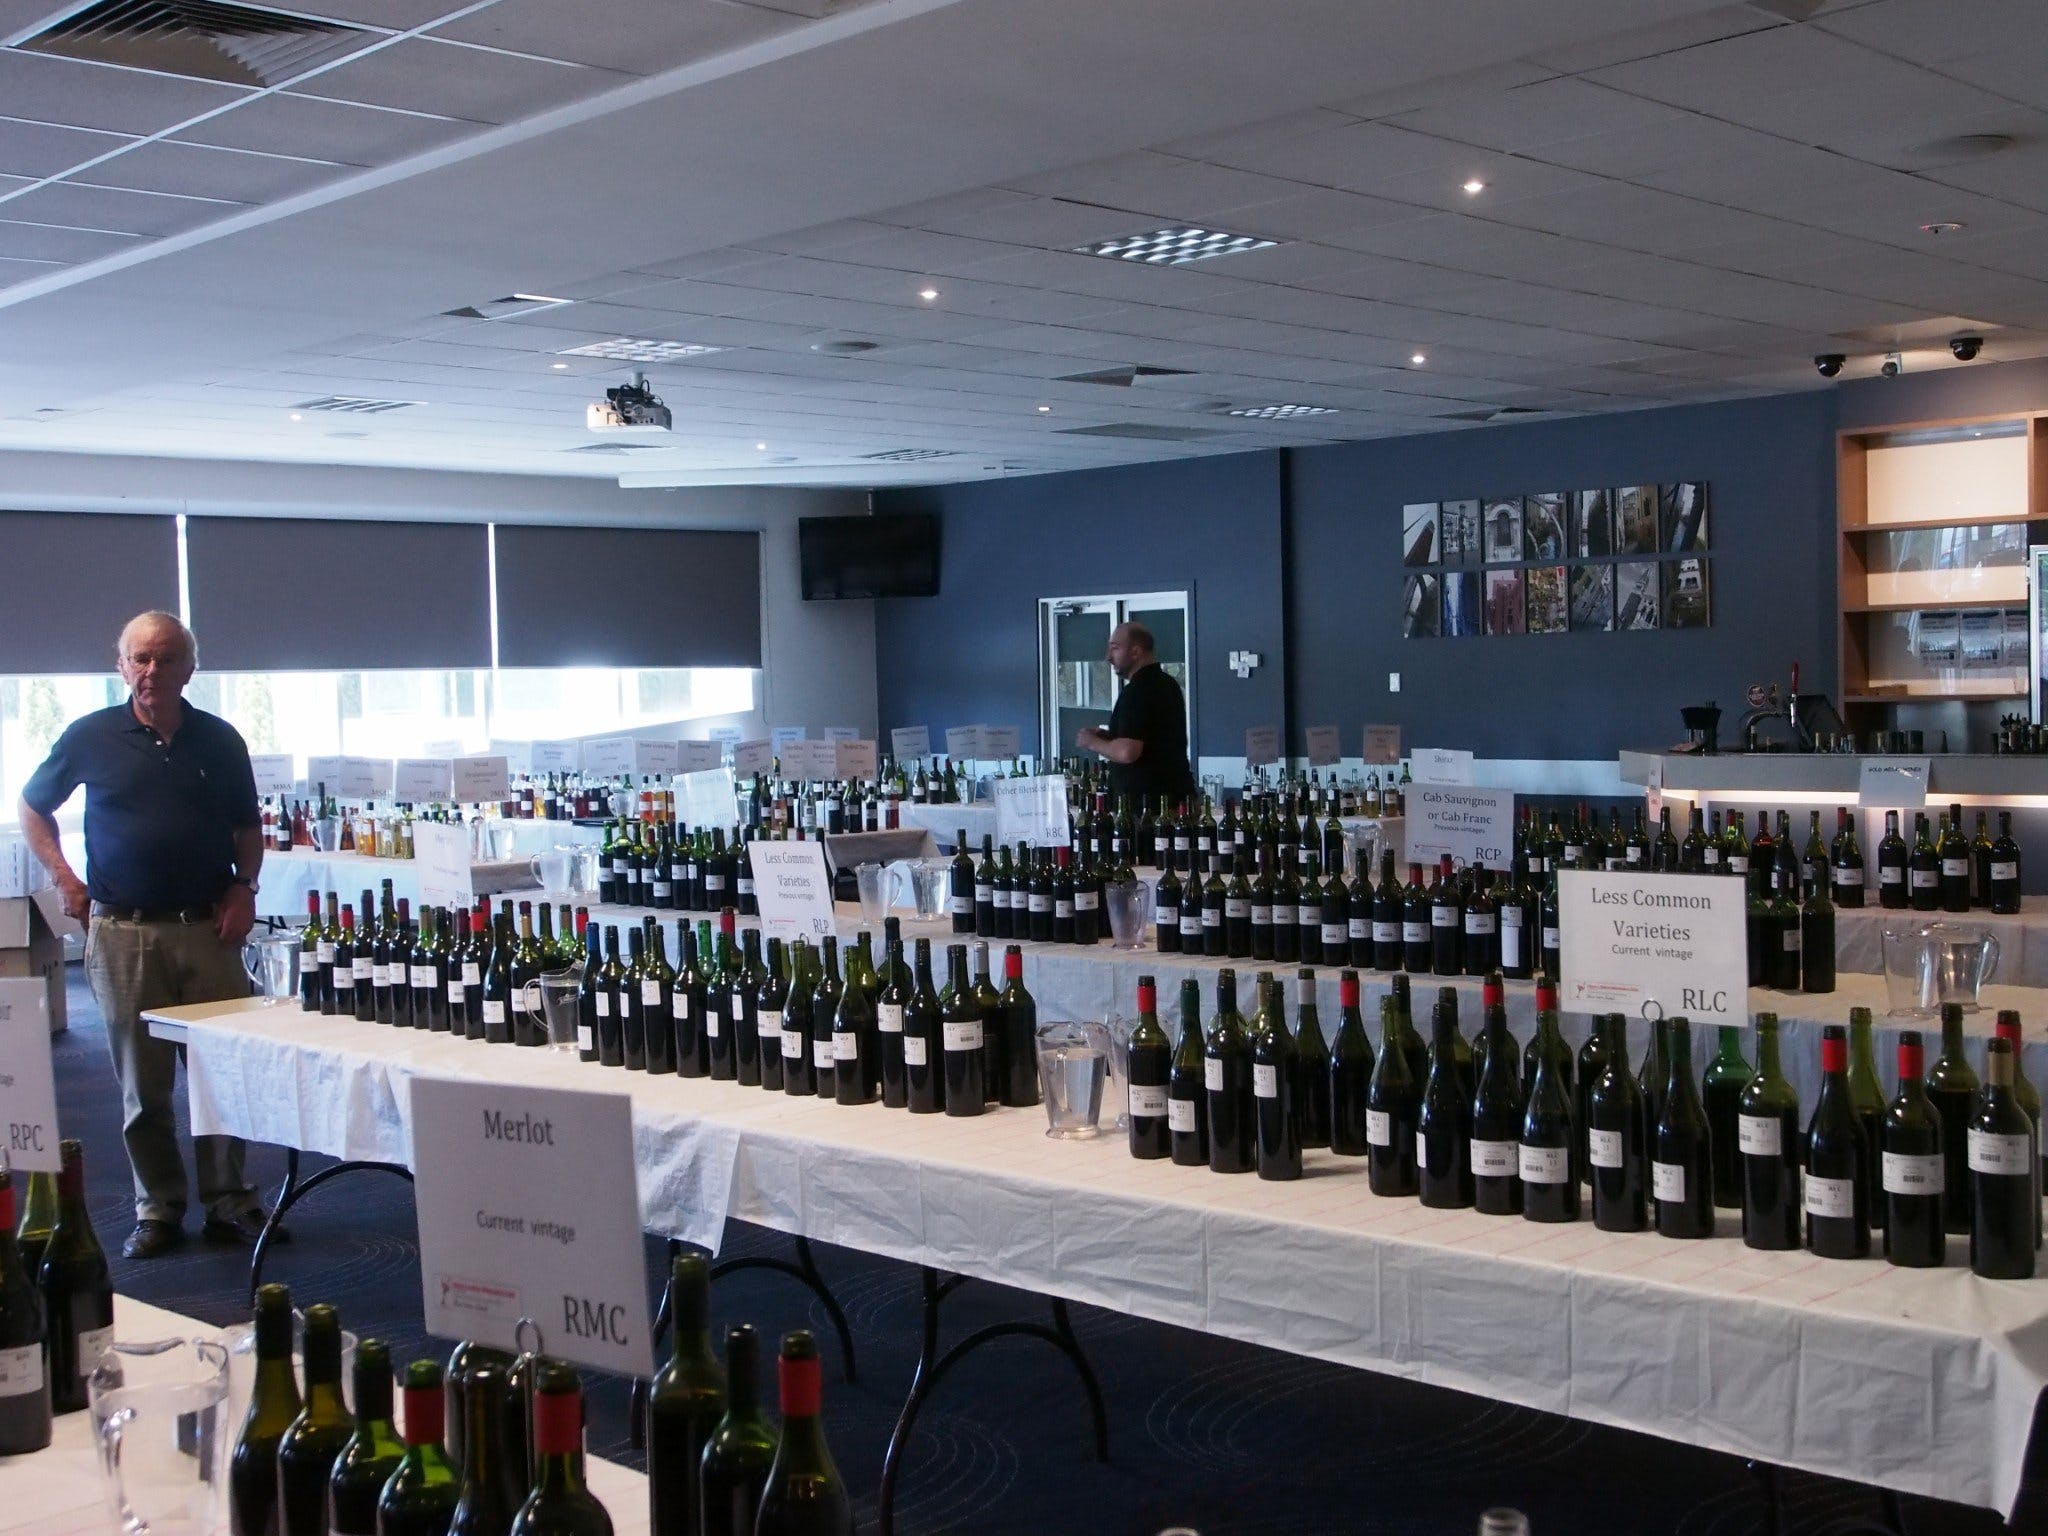 Eltham and District Wine Guild Annual Wine Show - 51st Annual Show - Perisher Accommodation